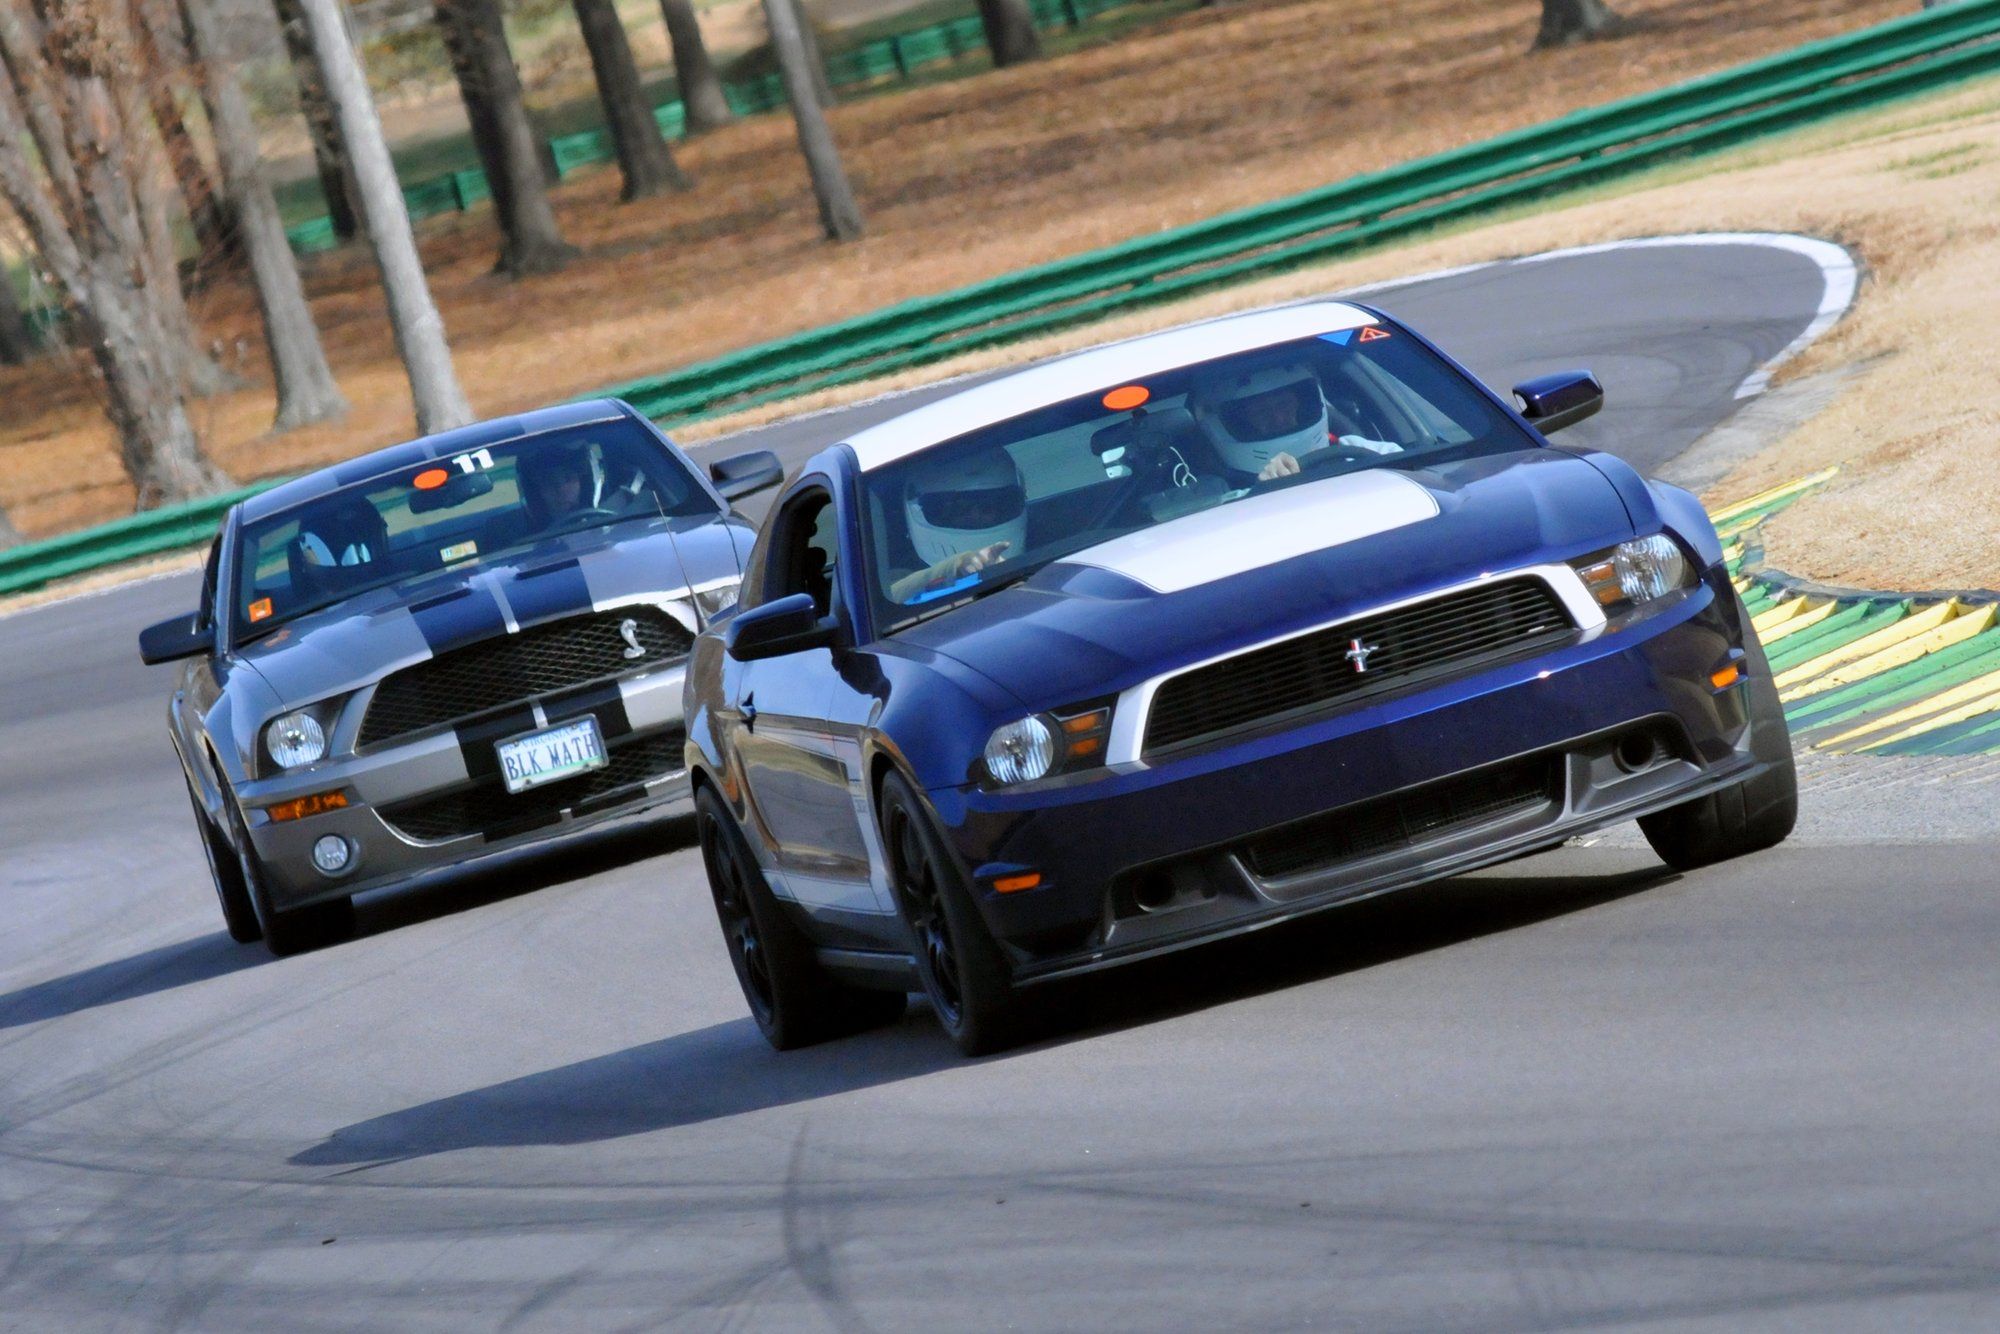 2012 Mustang
Boss_302 HPDE/Track -  (Midlife Crisis (Bought on 50th birthday))